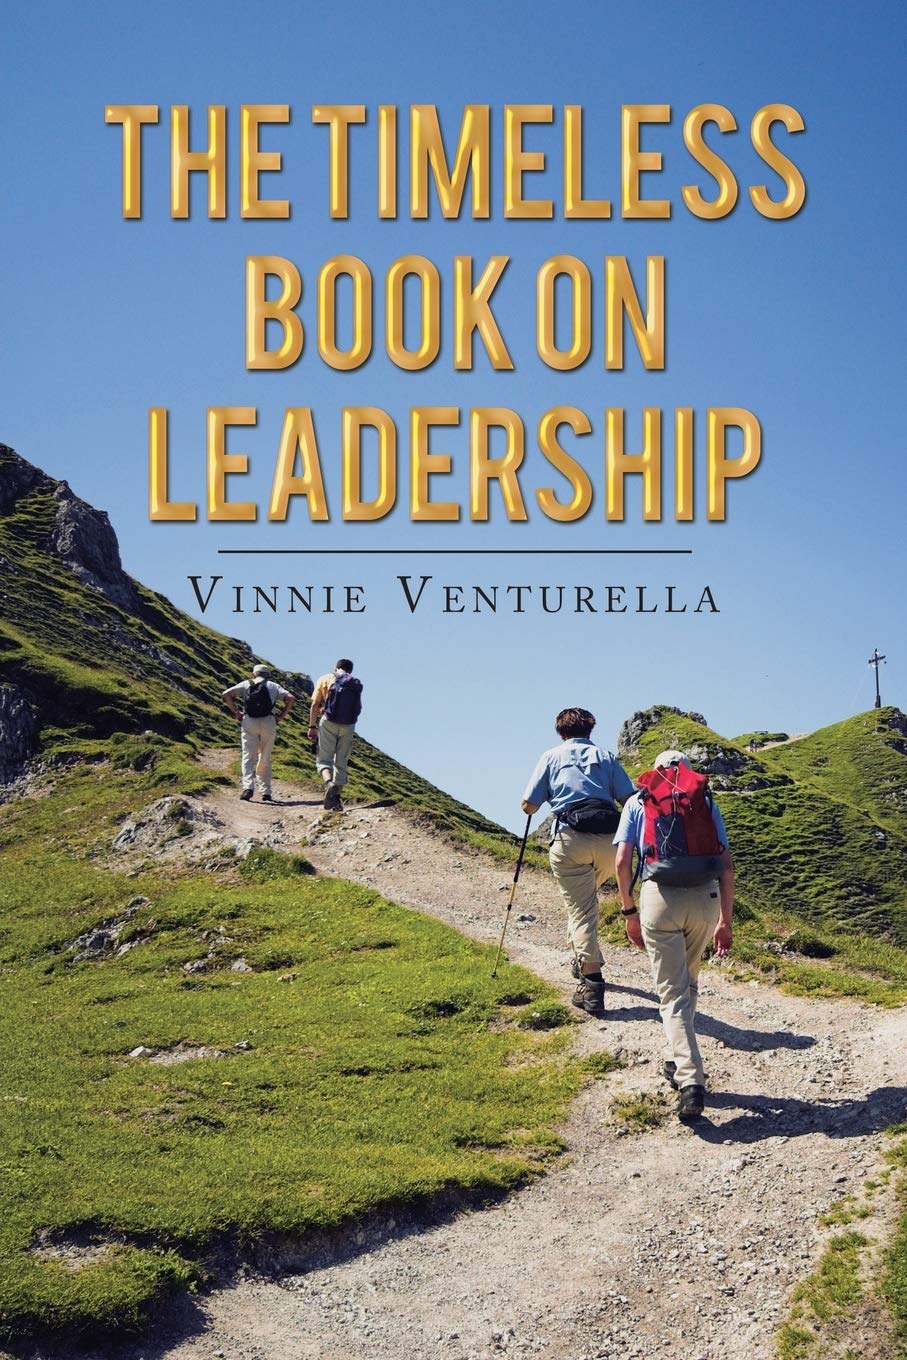 The Timeless Book on Leadership